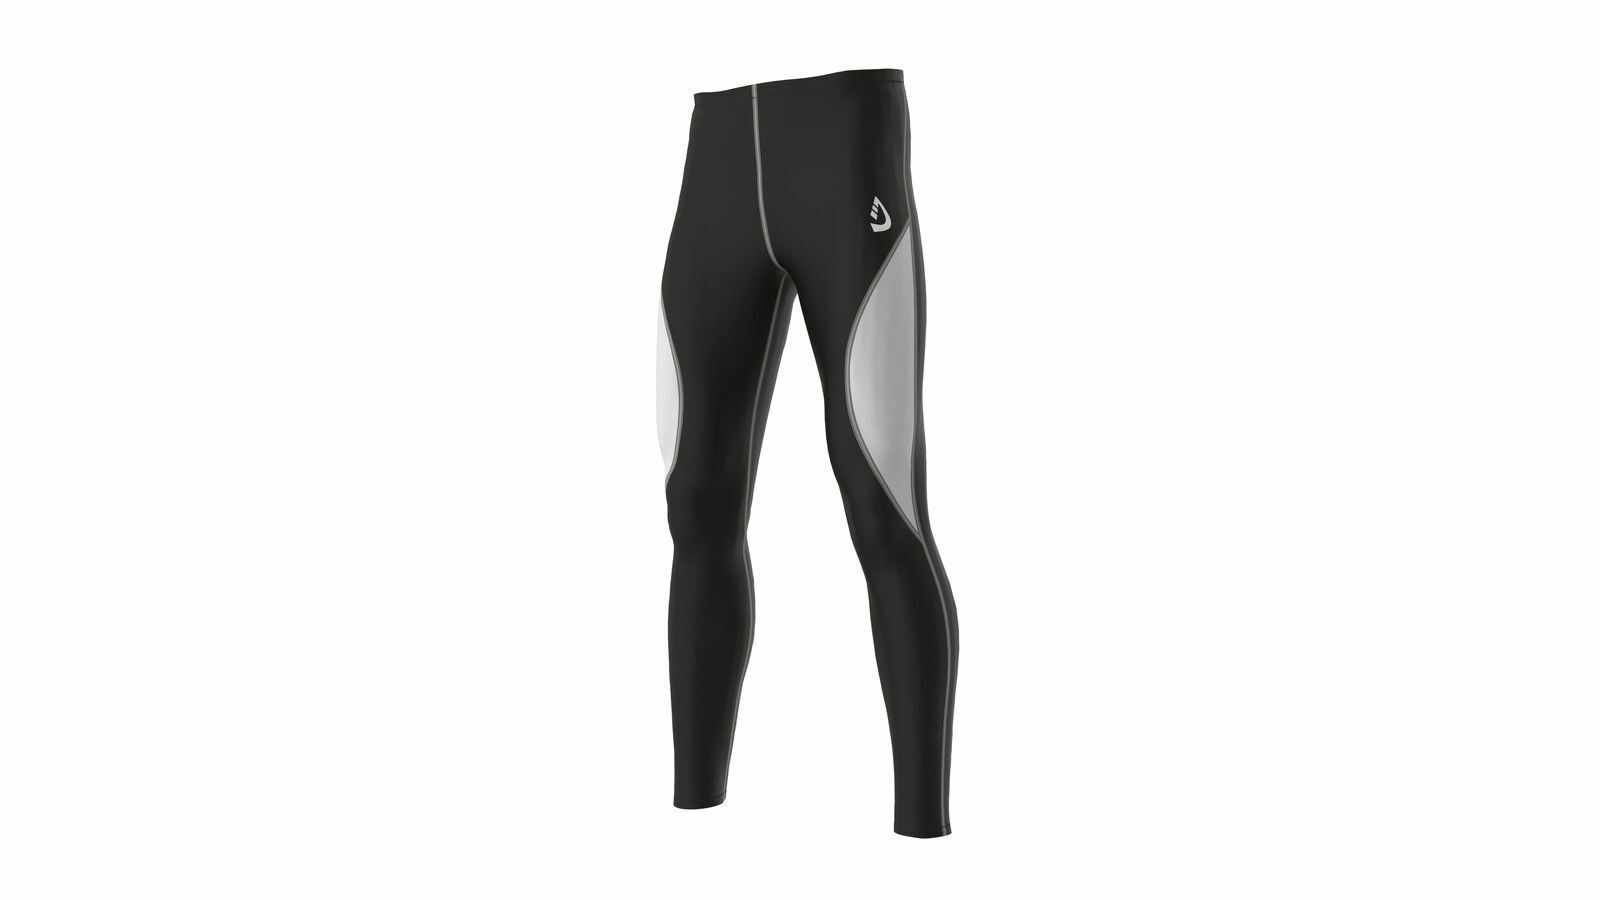 Base Layer Compression Mens Compression Leggings For Running, Basketball,  Football, Yoga Tight One Leg Exercise Trousers With Cropped Design From  Lcsexygirl, $8.96